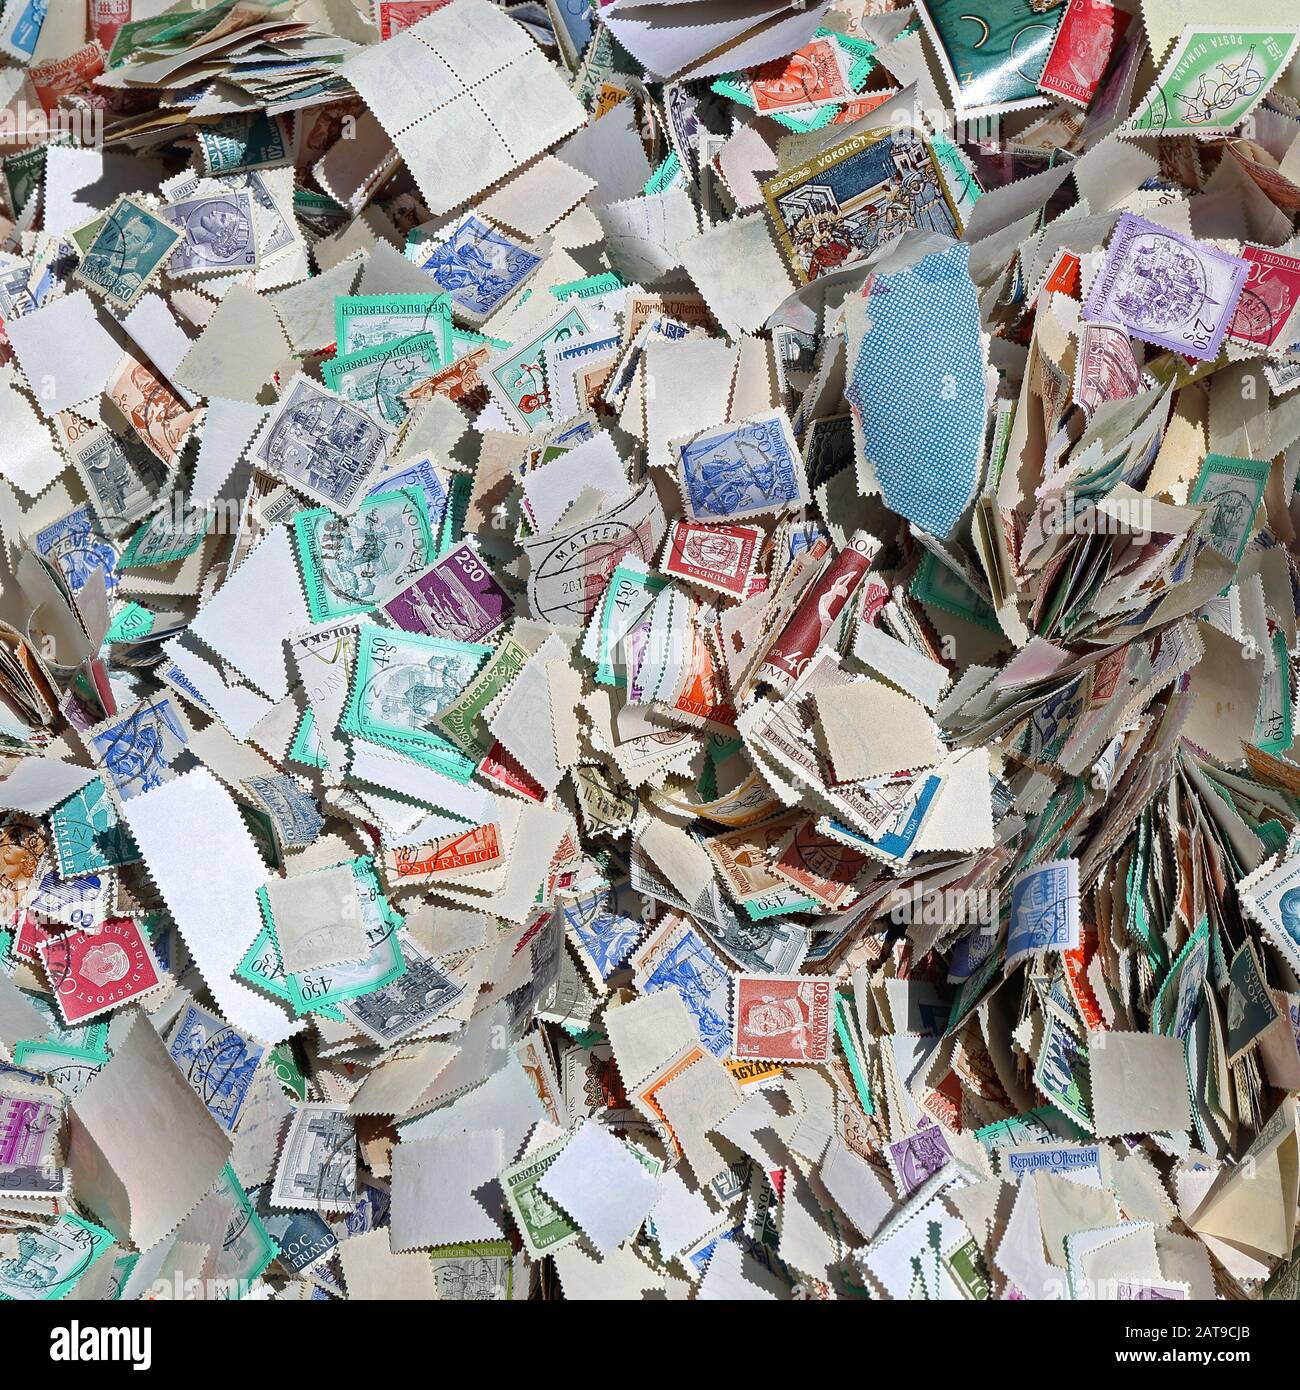 Used Unsorted Postage Stamps at Flea Market Stock Photo